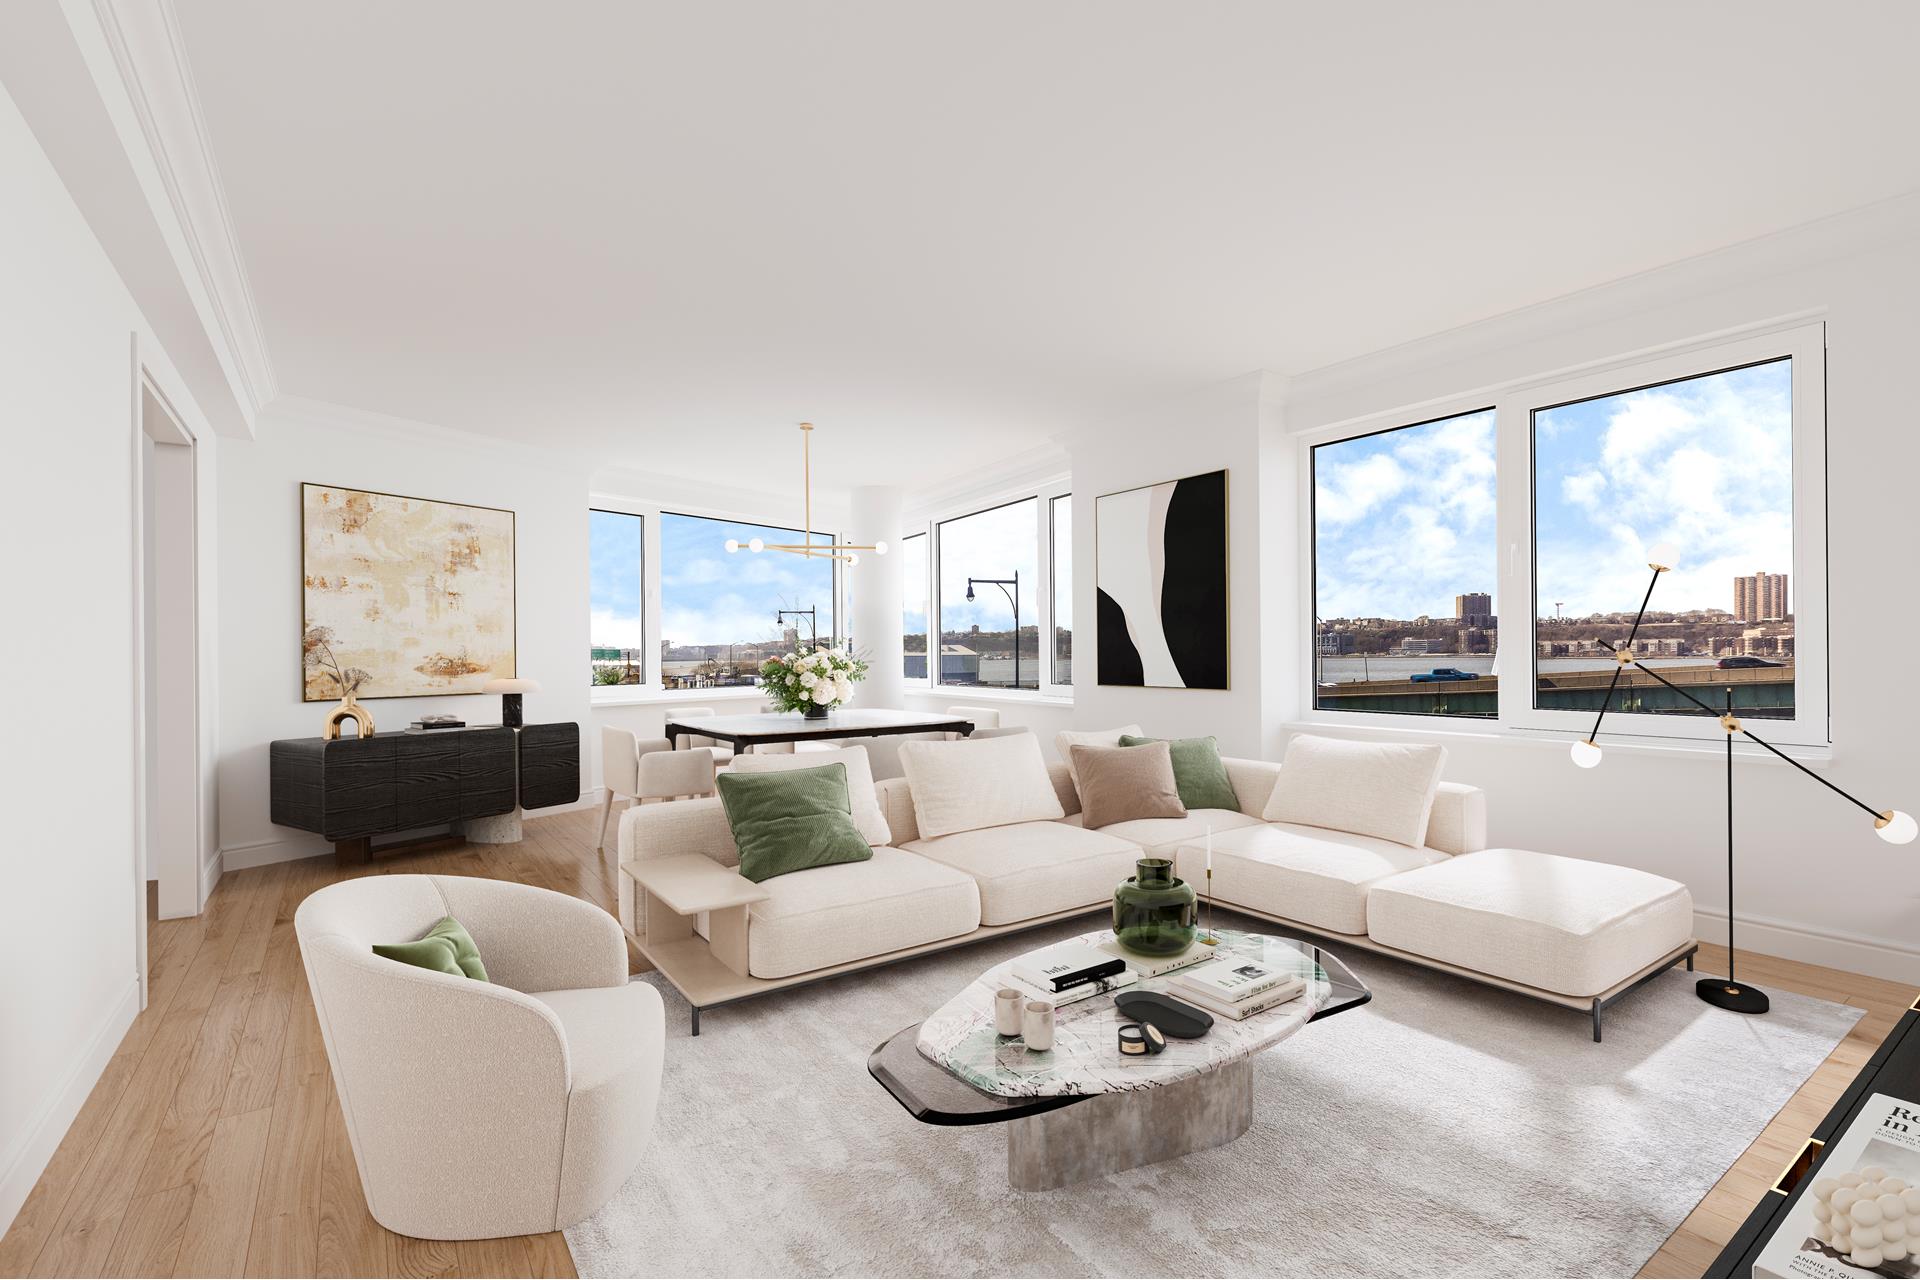 80 Riverside Boulevard 3L, Lincoln Sq, Upper West Side, NYC - 4 Bedrooms  
4 Bathrooms  
9 Rooms - 